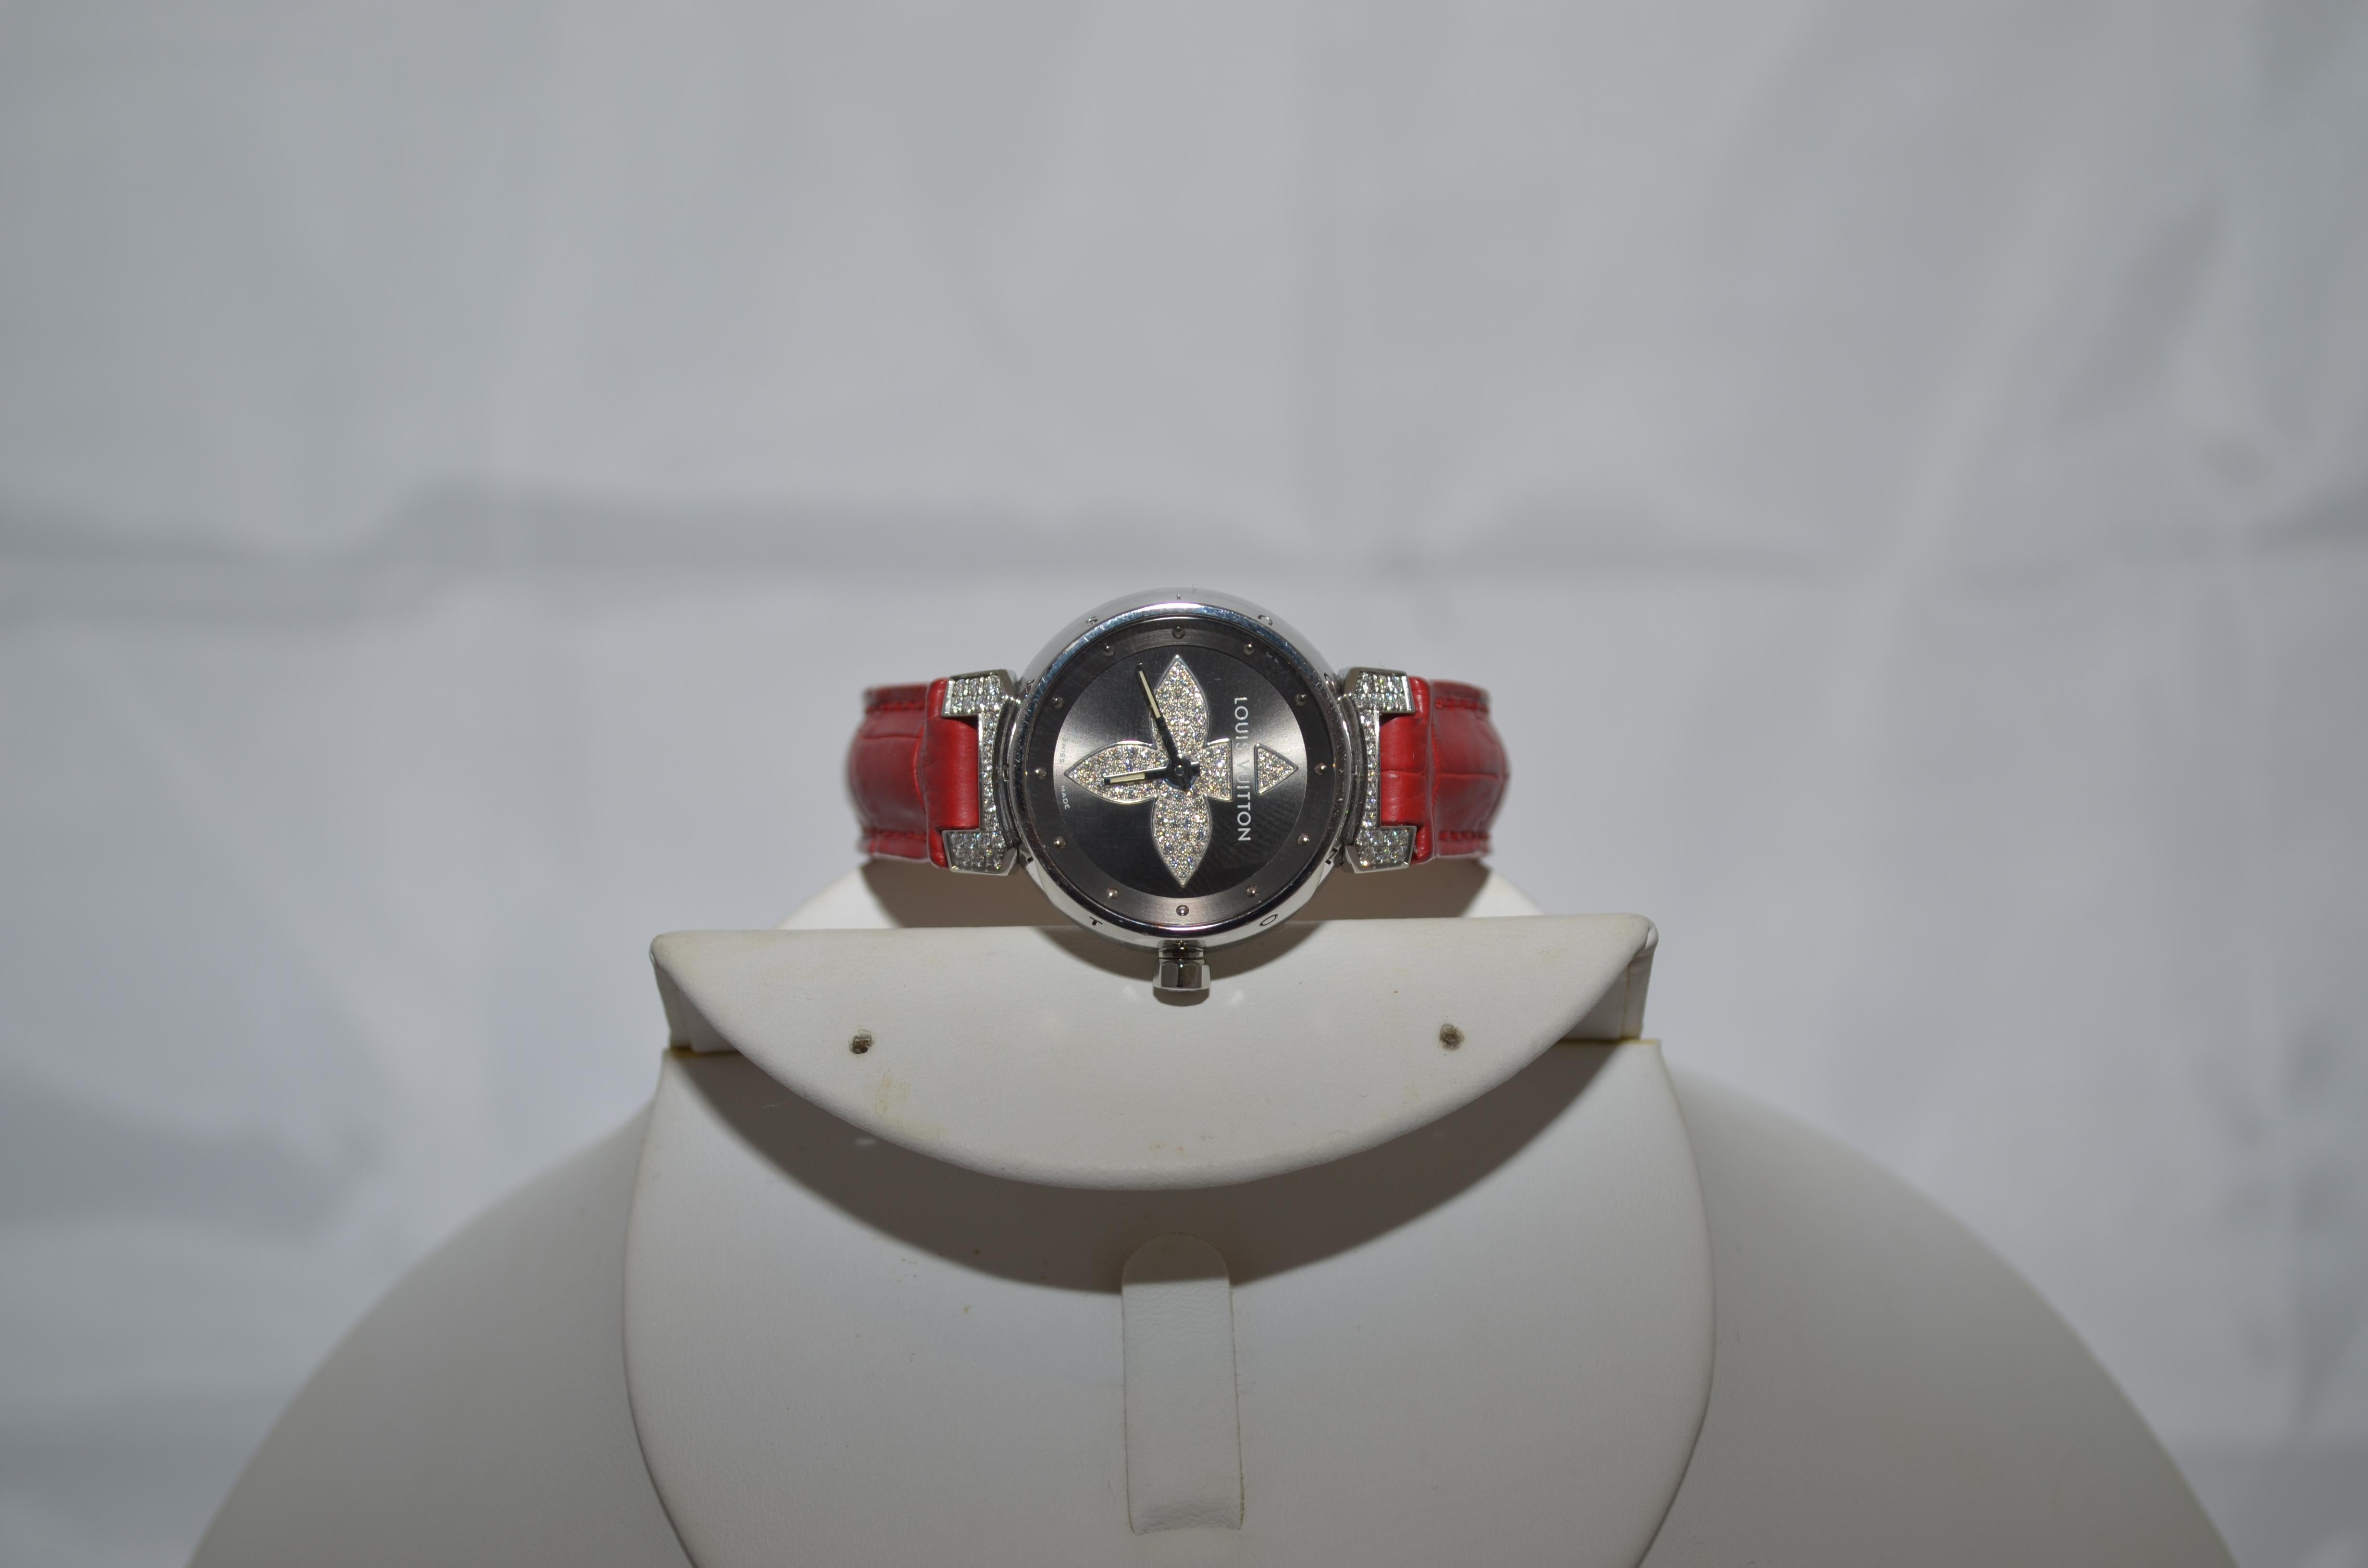 Louis Vuitton watch features a red genuine alligator band with silver hardware and diamonds encrusted in the face. Watch length measures approximately 8 inches. Excellent condition.